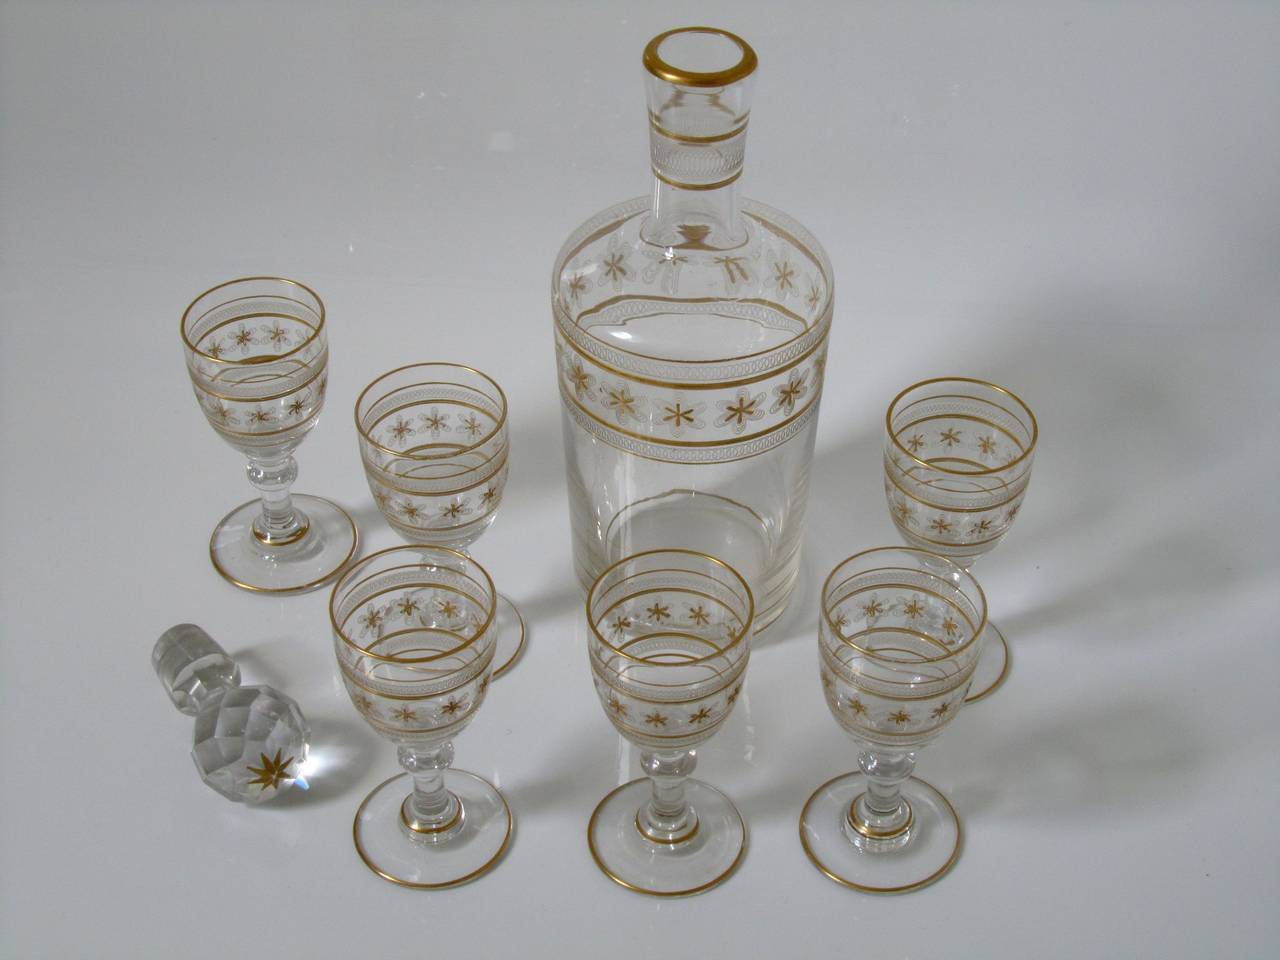 St. Louis Antique French Crystal Gilded Liquor or Aperitif Serving Set In Good Condition For Sale In Triaize, Pays de Loire